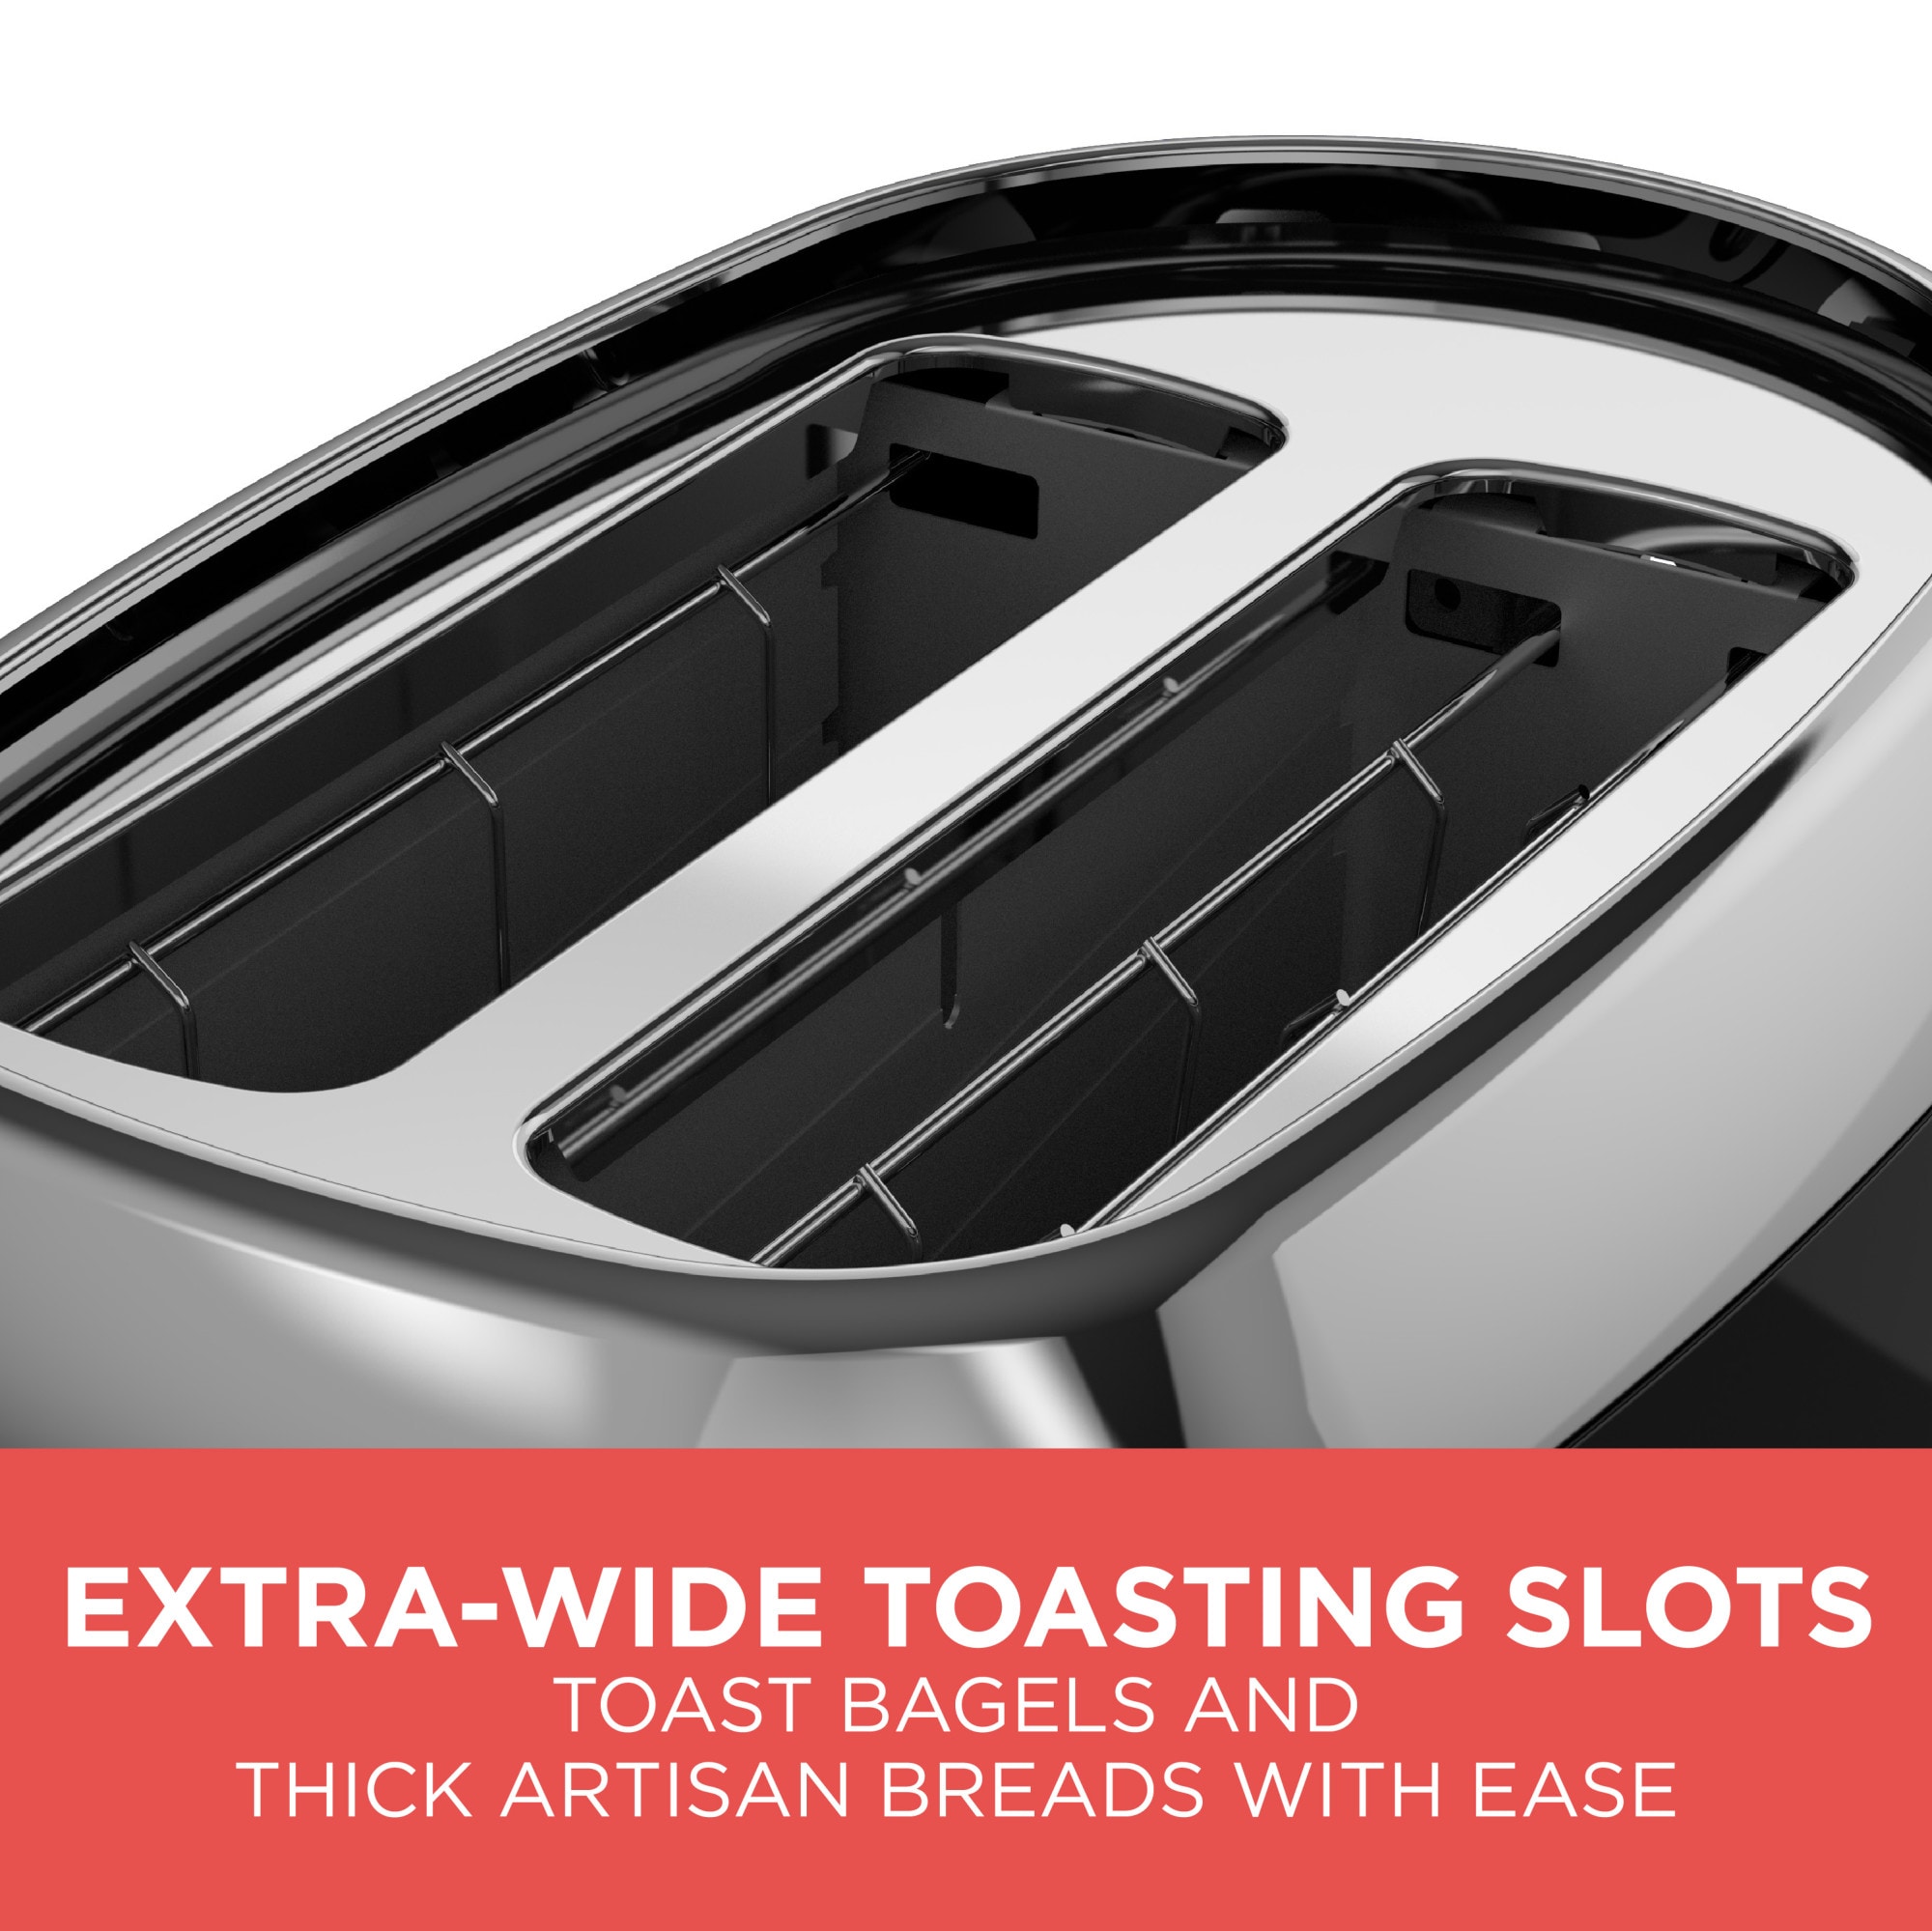 DeltaToast – The toaster for small kitchens